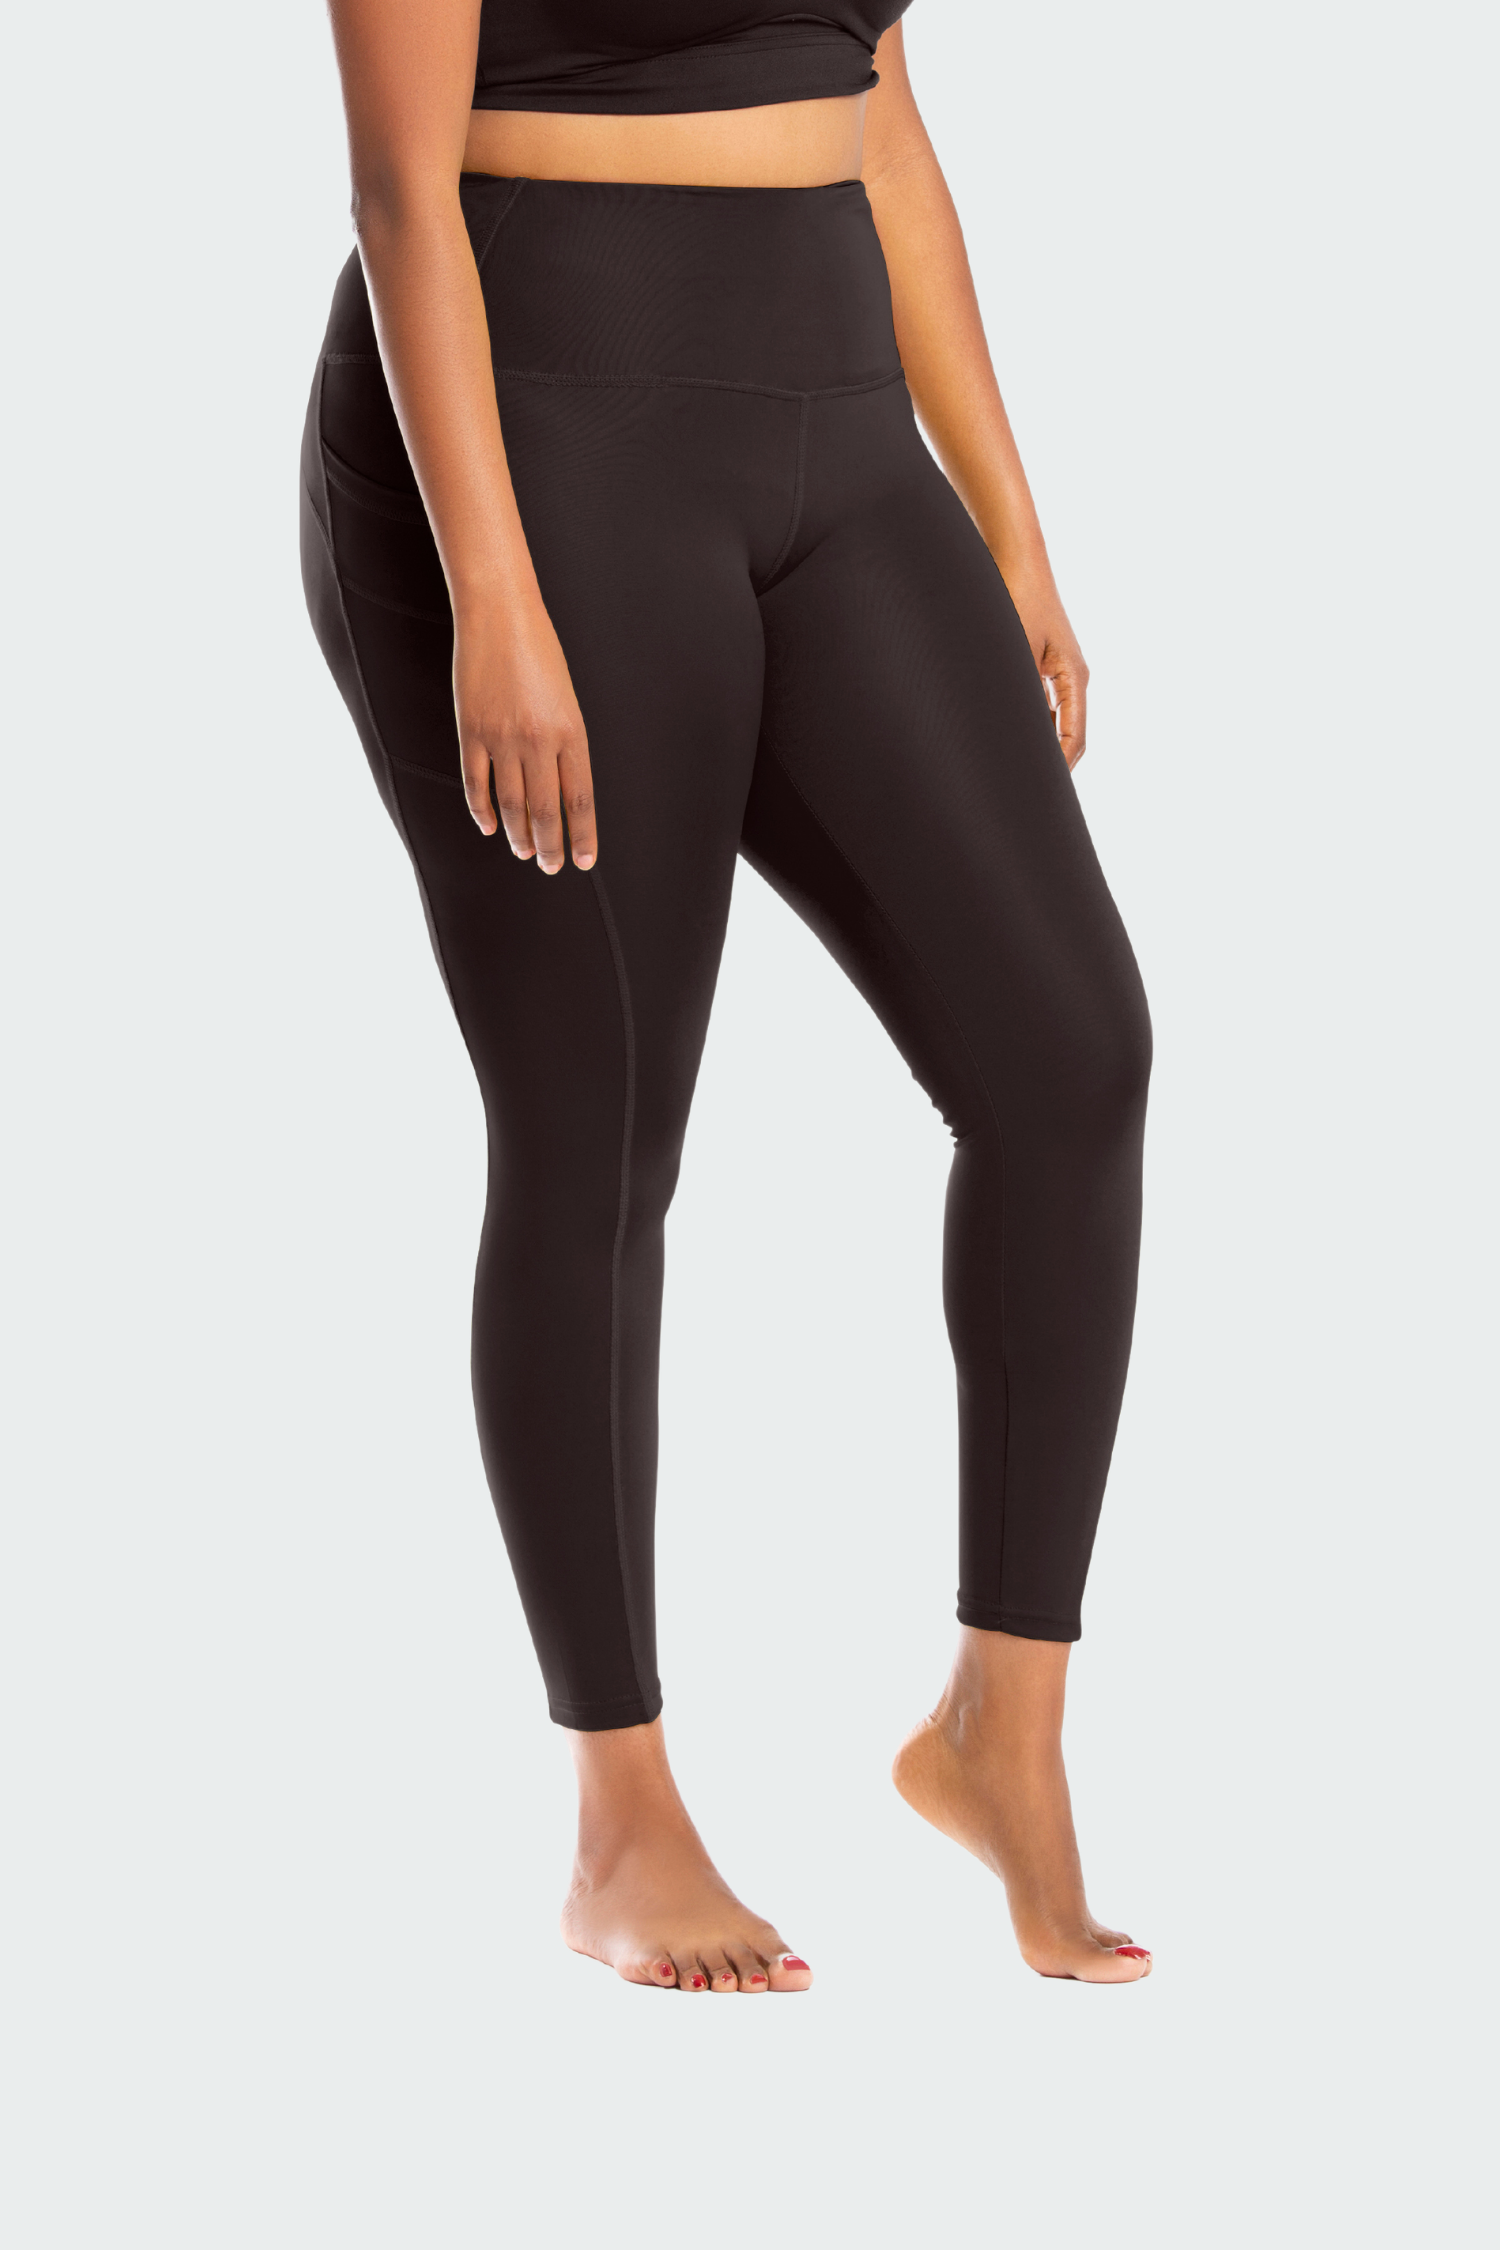 High-Waisted Assorted Colors Legging Set. Plus Sizes Available (6-Pk.)